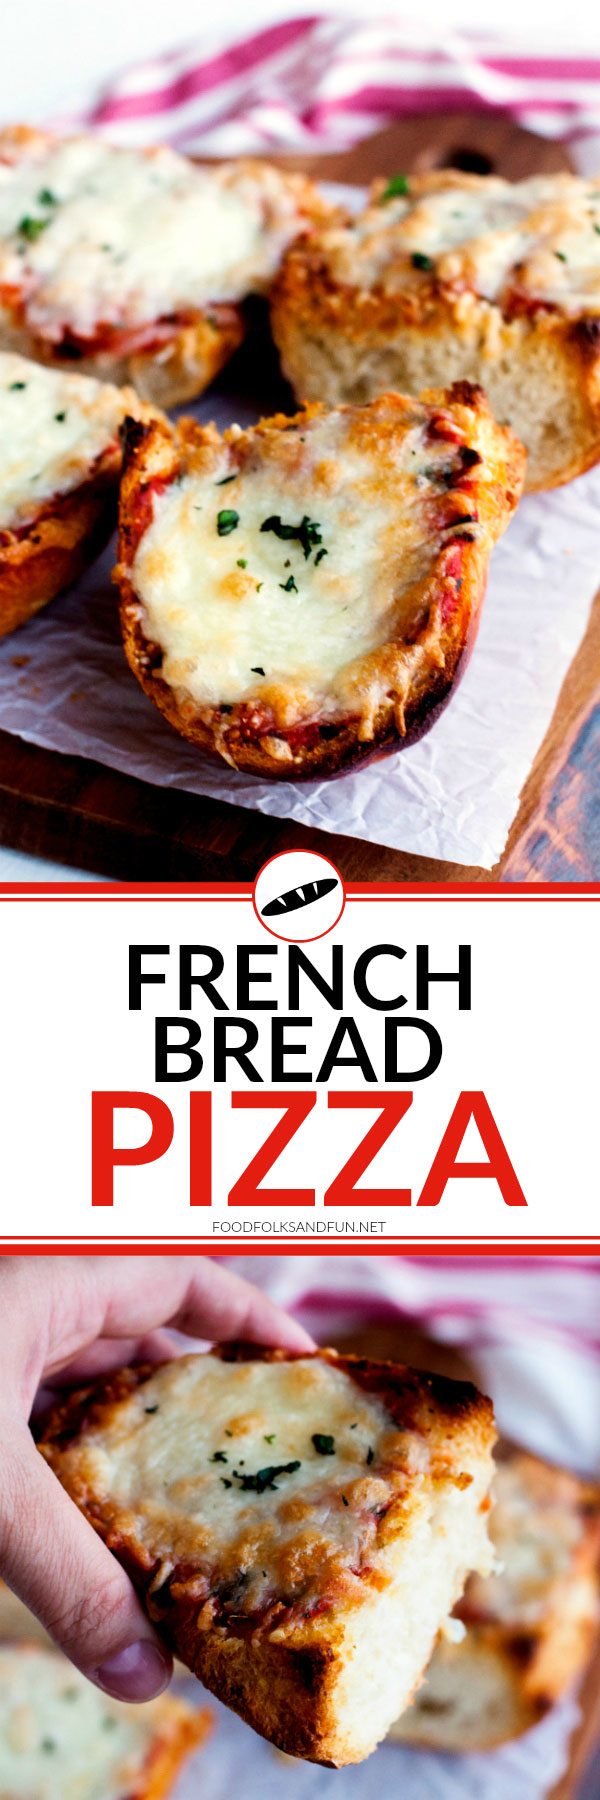 Serve this French Bread Pizza for pizza night, weeknights, or weekends. It’s delicious and so easy to make; get it on your table in less than 30 minutes! via @foodfolksandfun